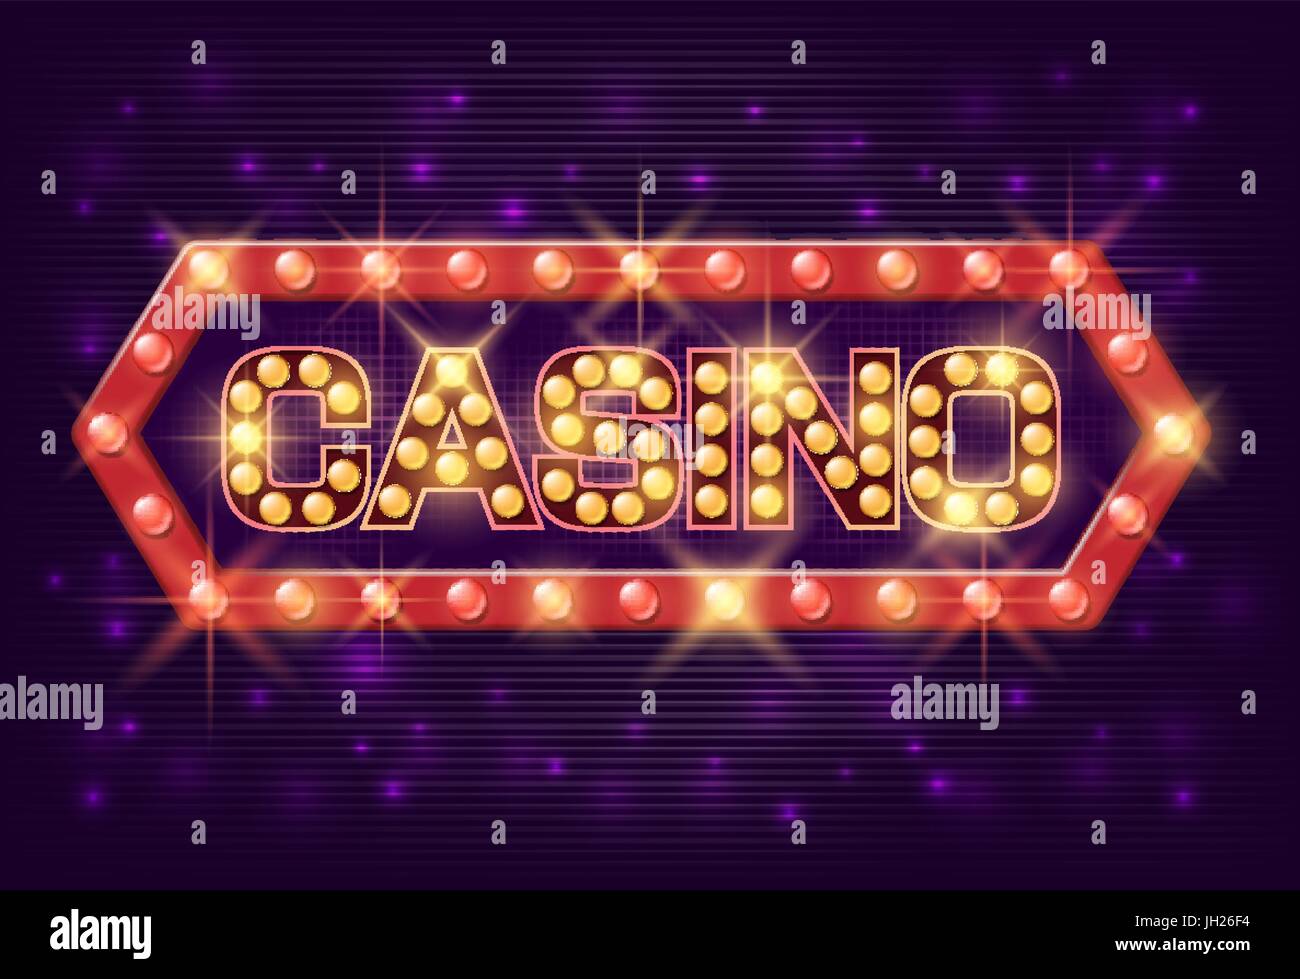 Casino poster vintage style. Casino banner with glowing lamps for online casino, poker, roulette, slot machines, card games. Vector illustrator. Stock Vector